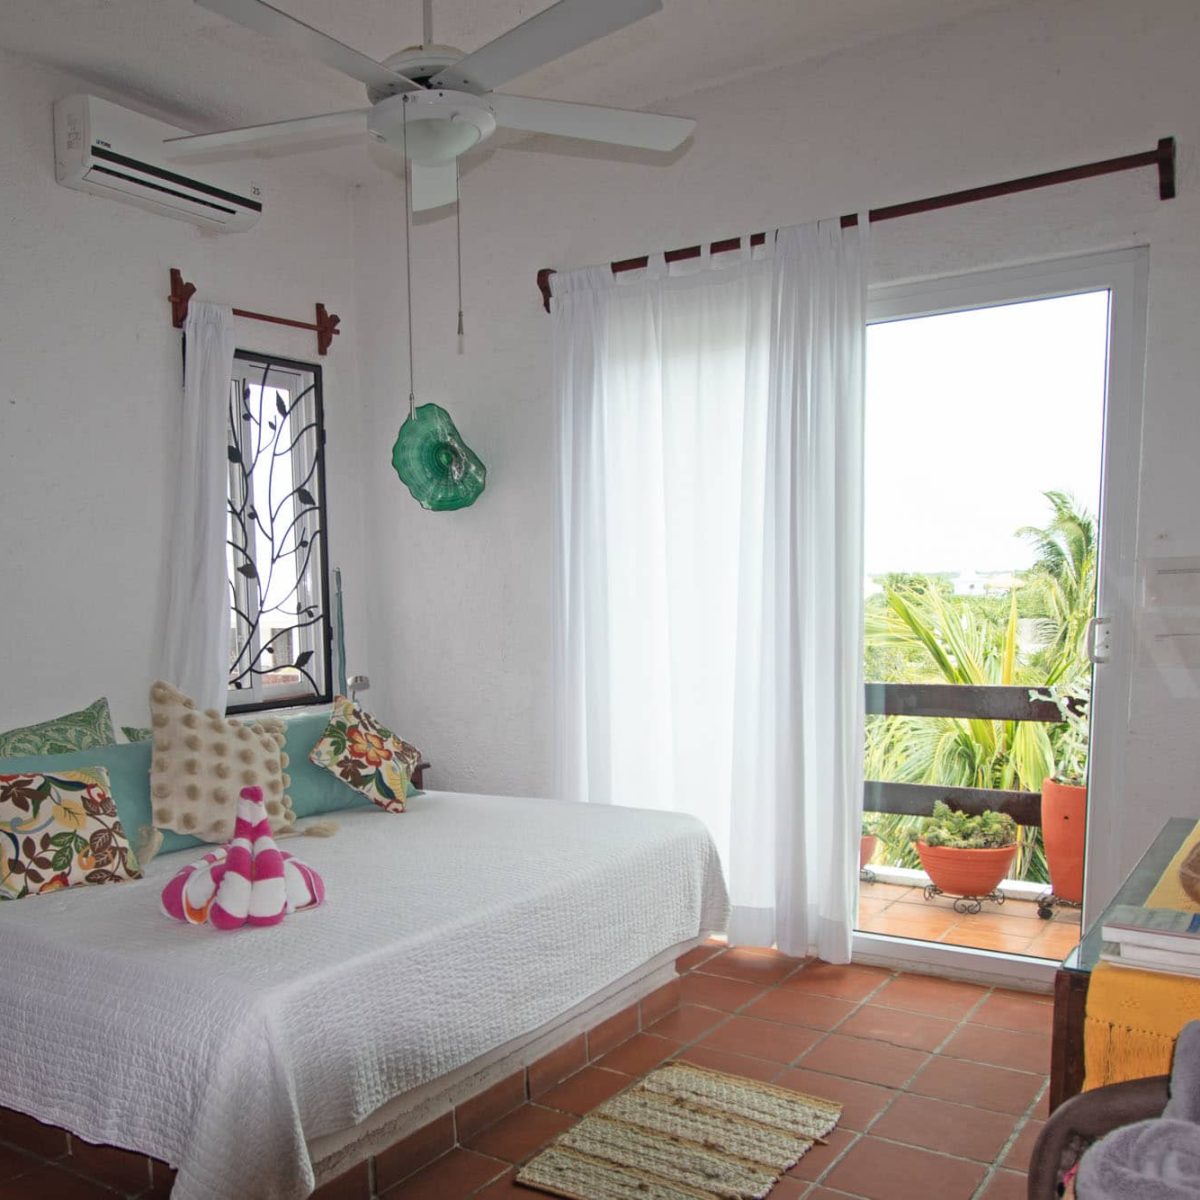 Azul Cielo, La Sirena #12, The Garden Side Bedroom IS Spacious With a Gorgeous Antique Carved Dresser